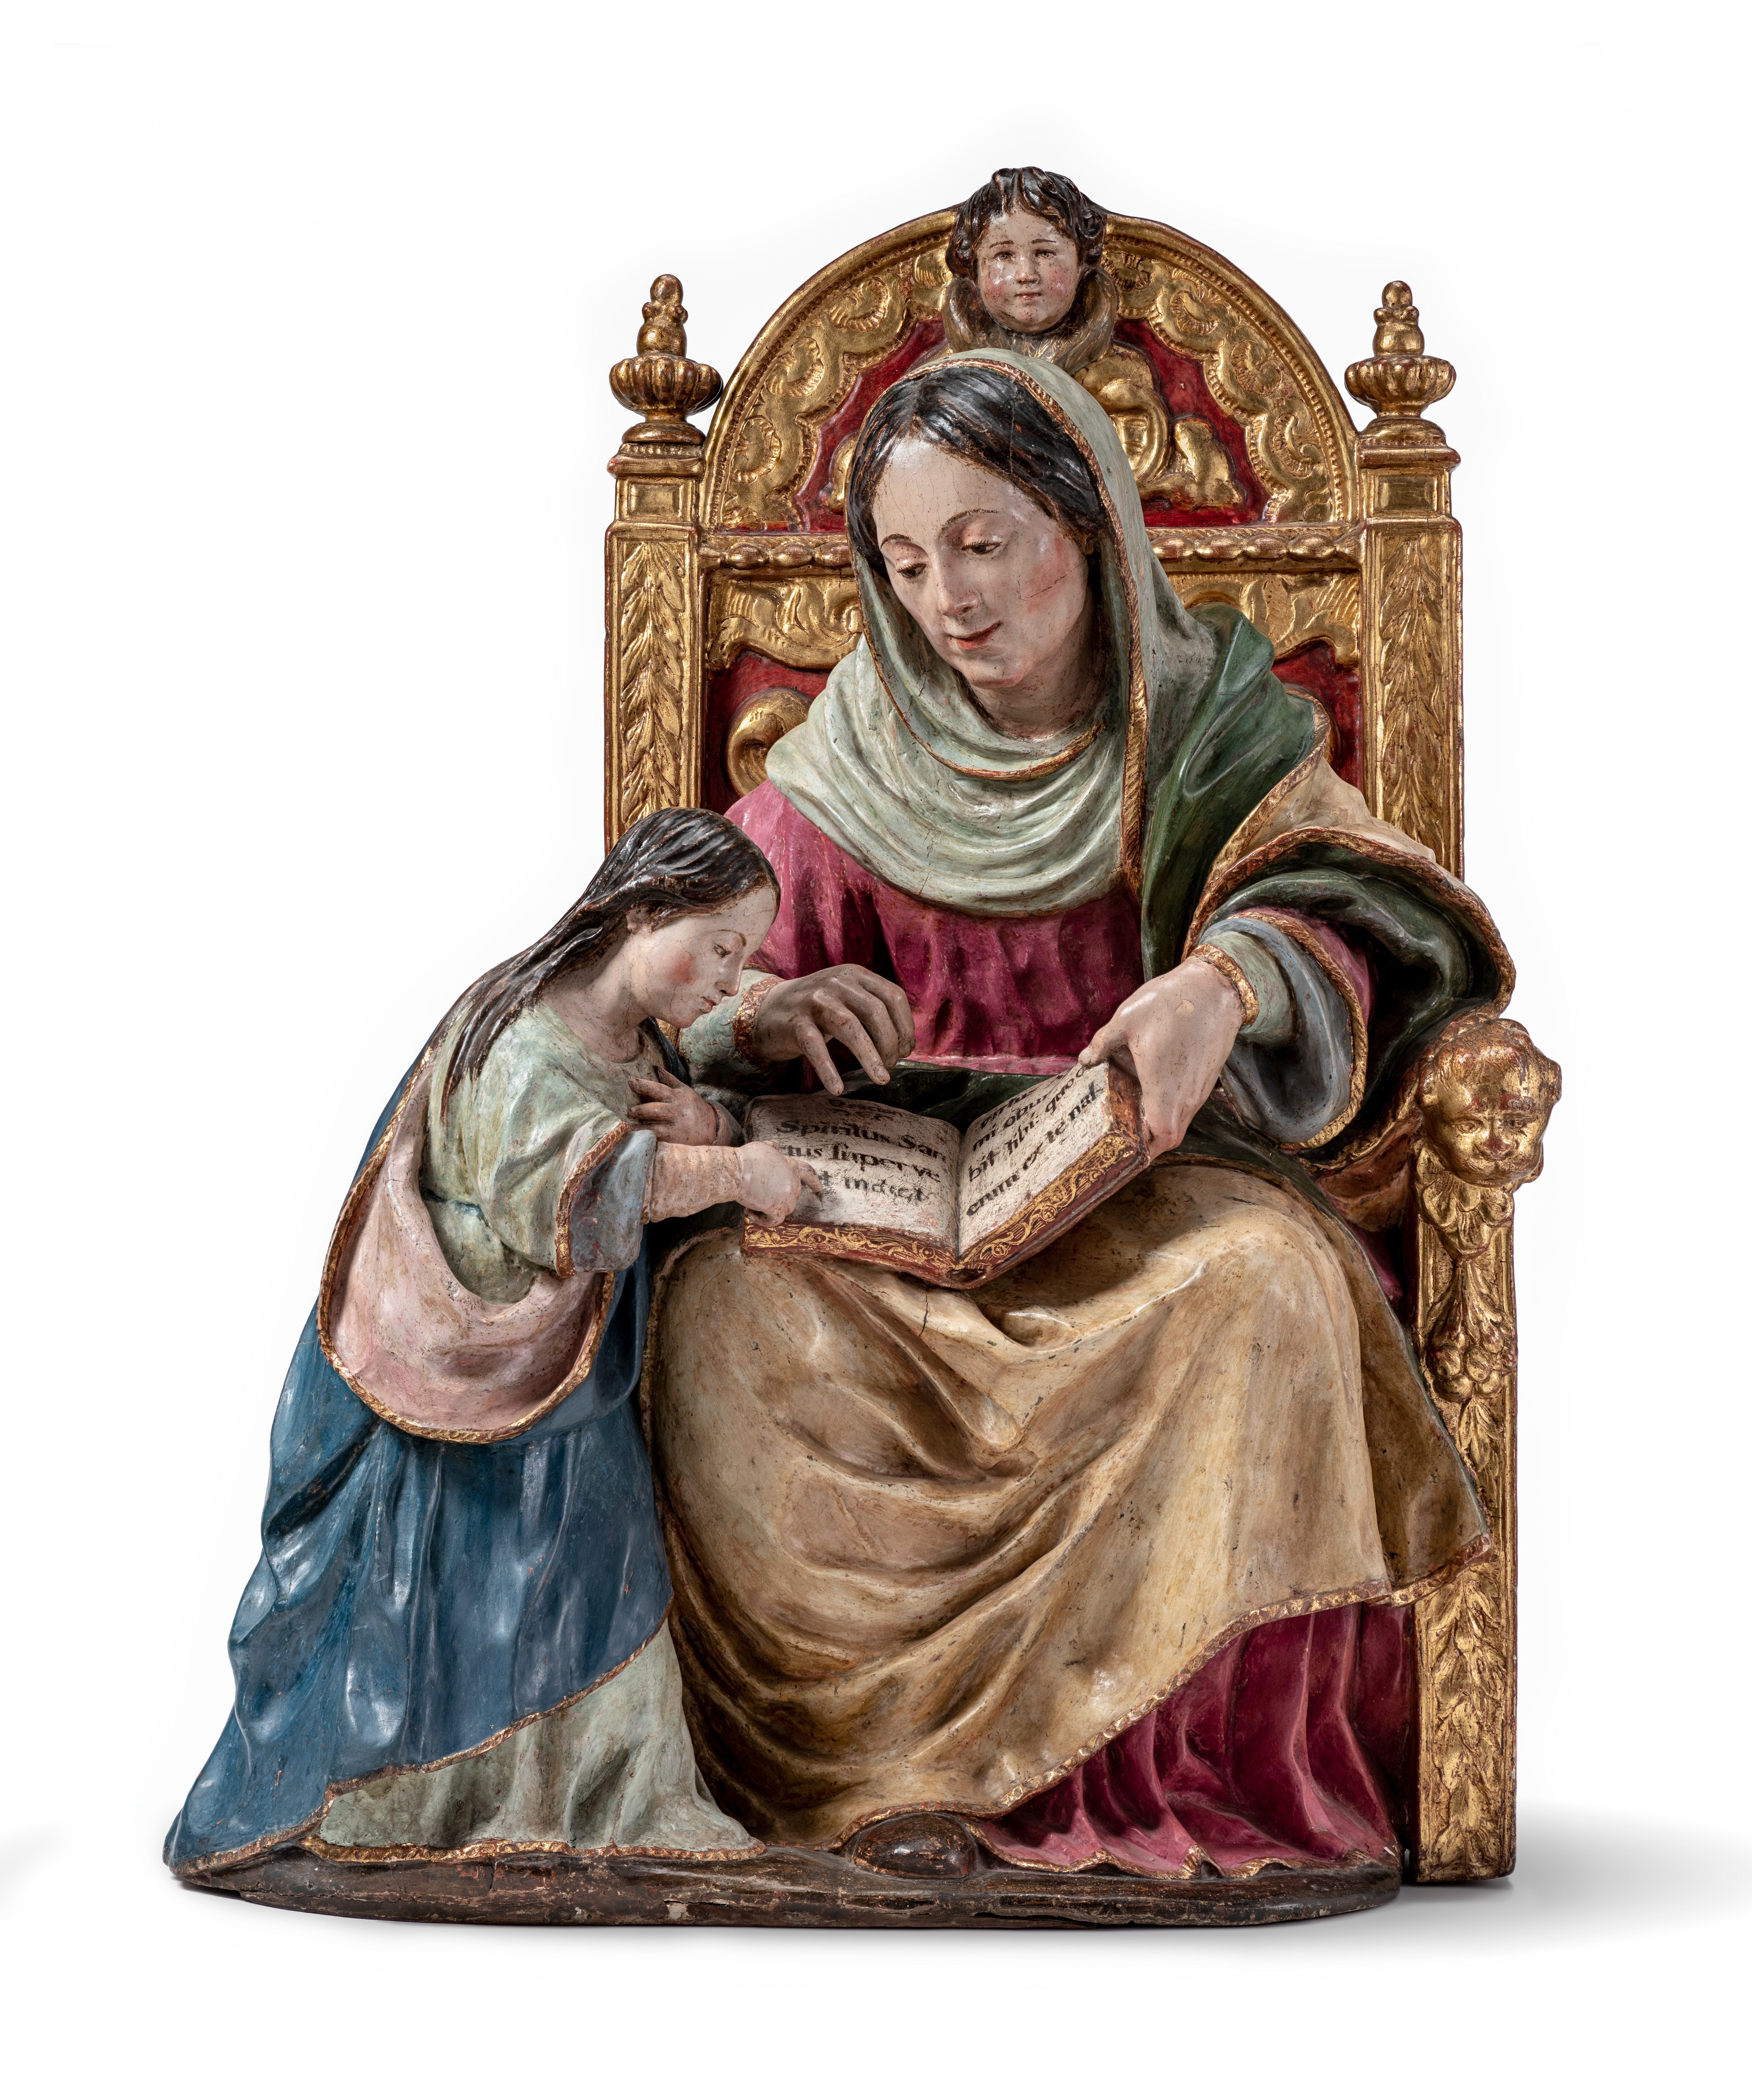 A polychrome wood sculpture of a woman seated in a red and gold throne, wearing classical or Biblical robes, with a book open in her lap. Beside her, a young girl who is also dresses in robes stands and points to the book, looking intently at the page. The woman also gestures at the page, engaged in conversation with the young girl. The crown is adorned with the face of a child at the top.